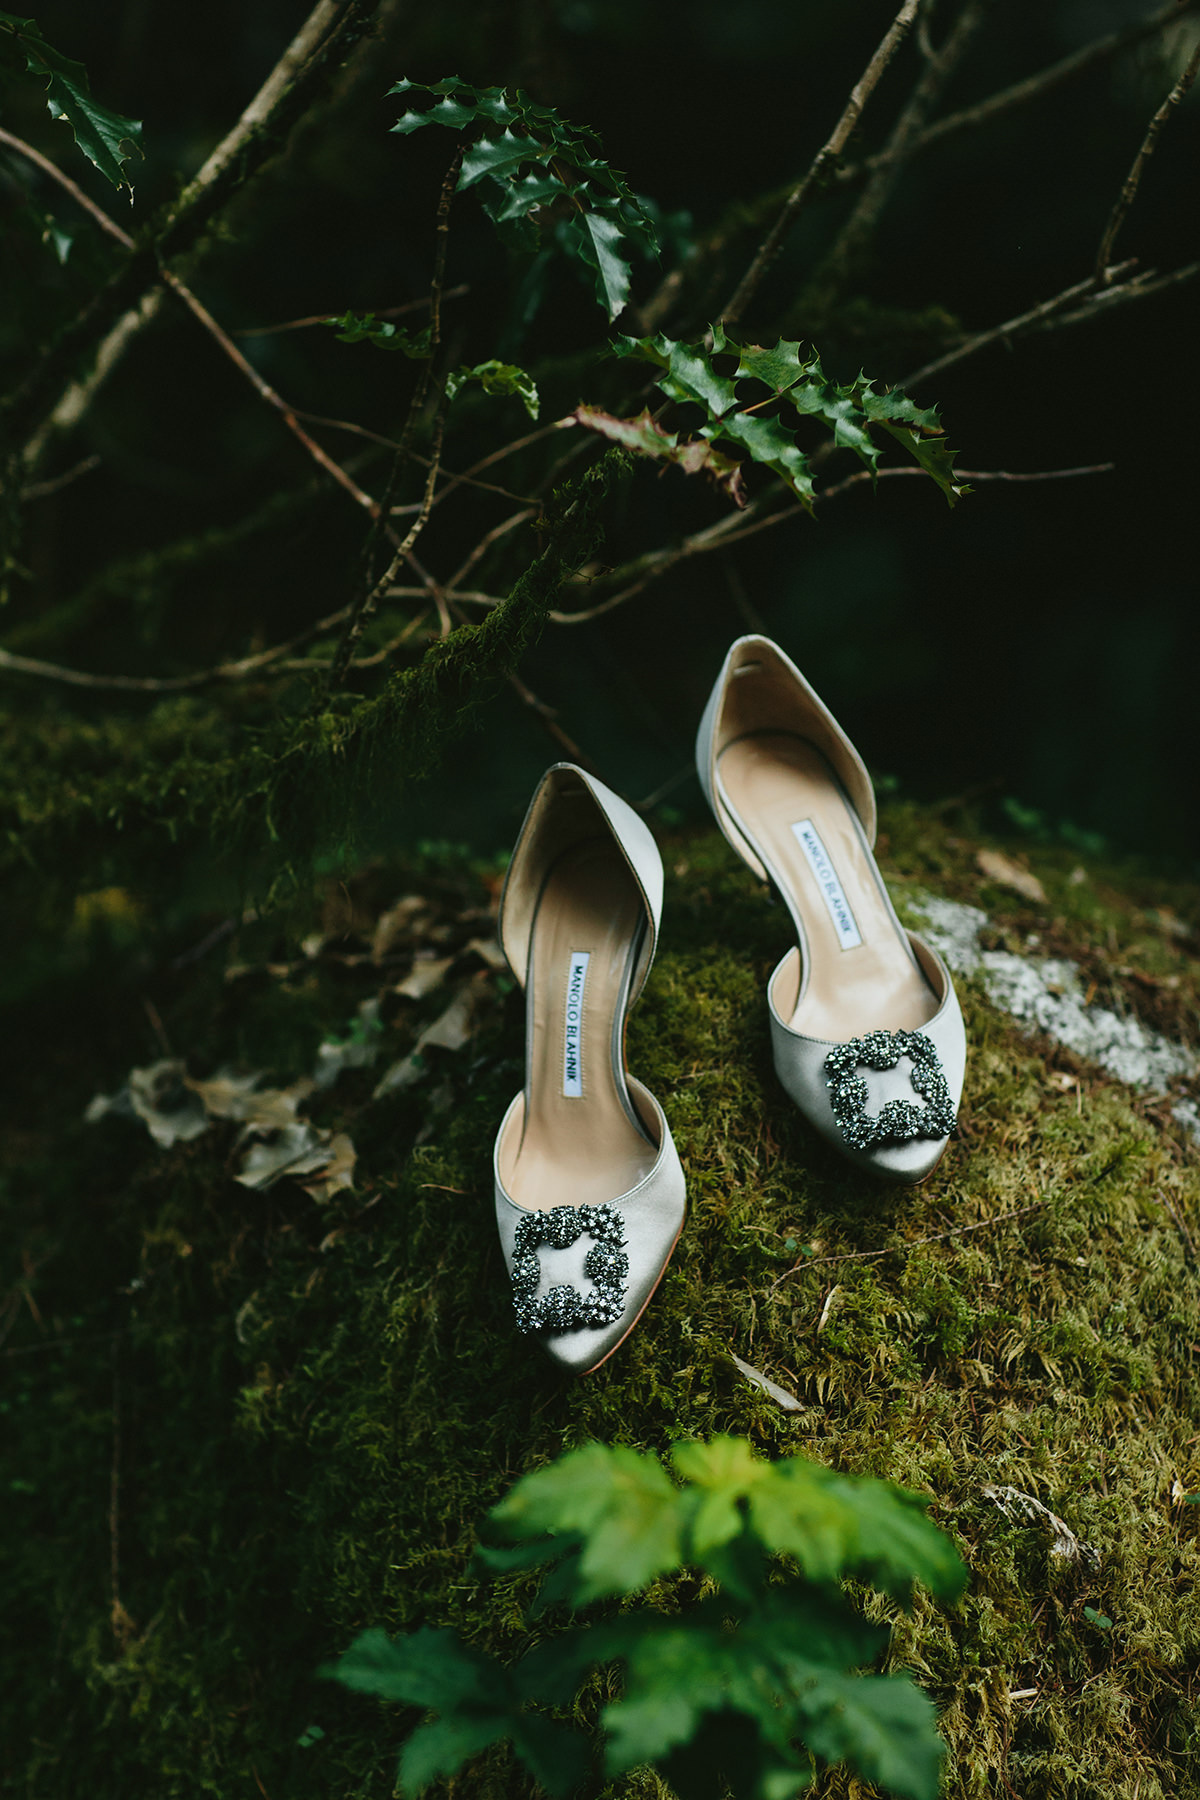 Manolo Blahnik wedding shoes in Vancouver www.lucida-photography.com